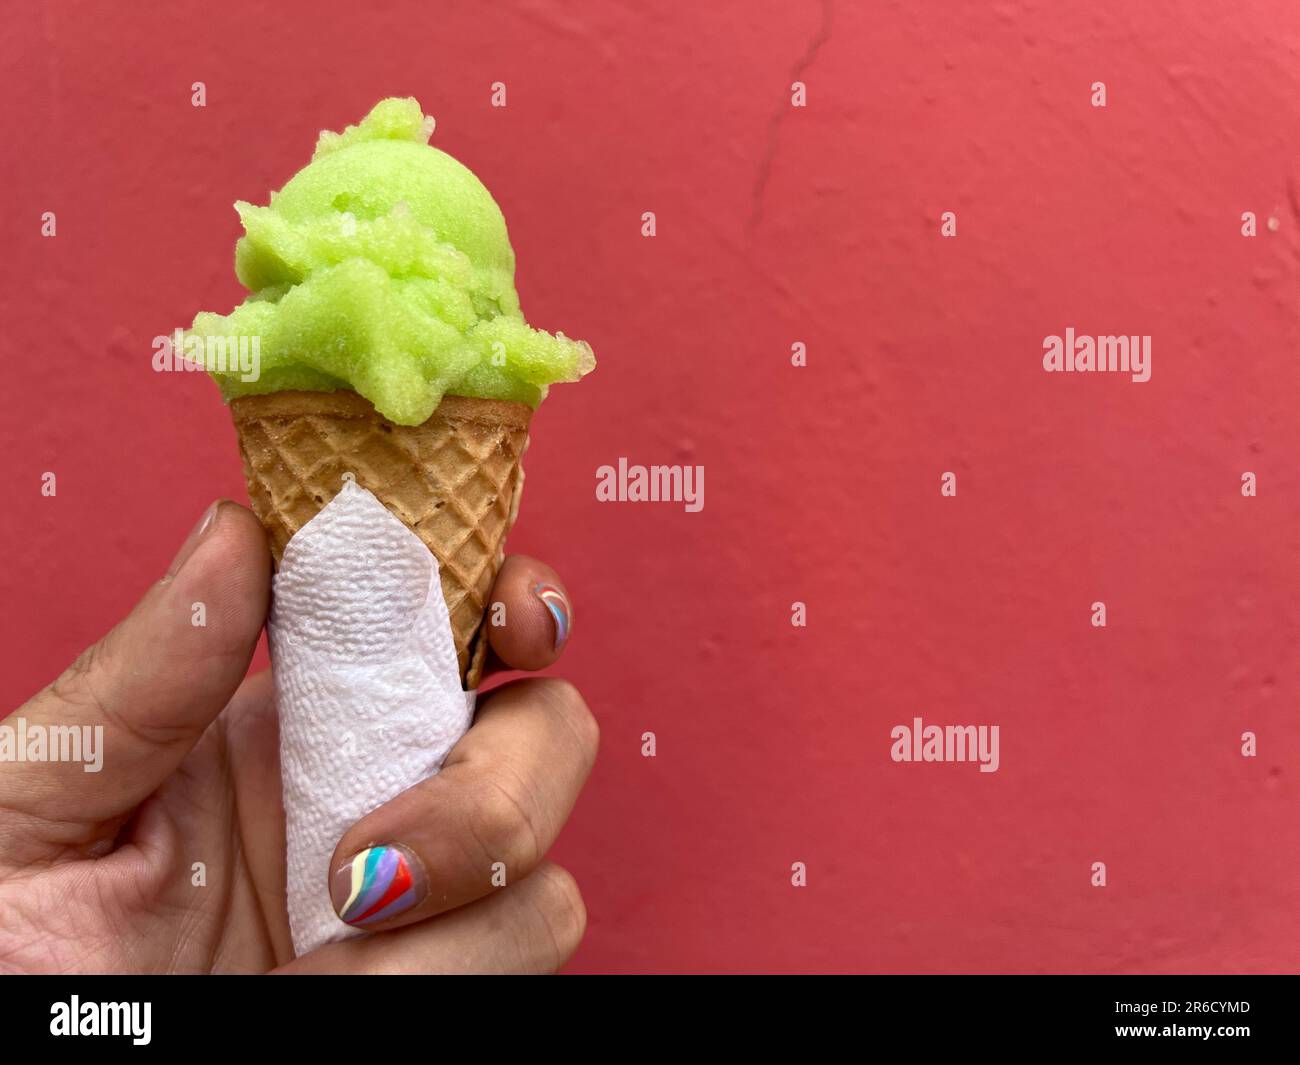 Hand with nail art manicure swirl design holding a ice cream cone with a scoop of lime green sorbet Stock Photo